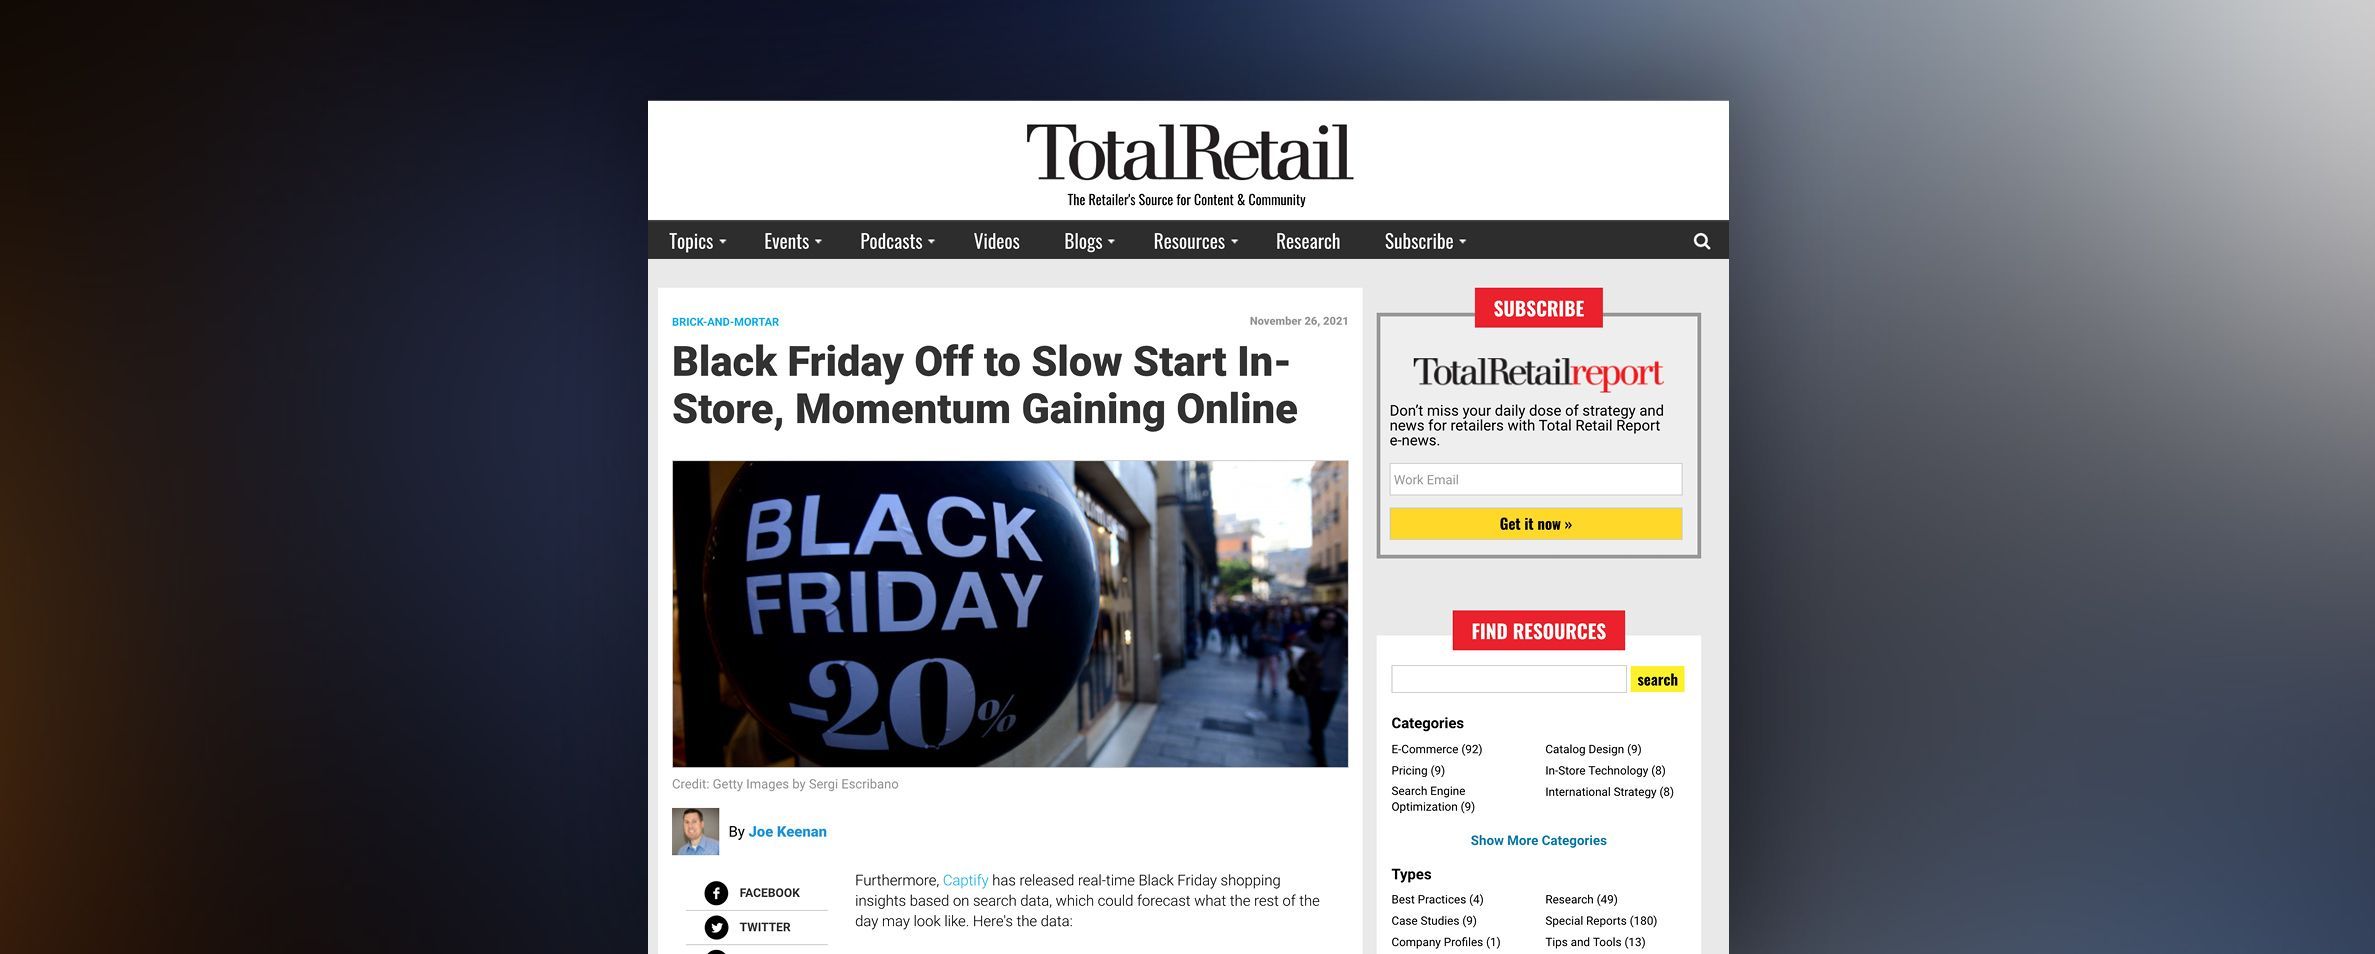 Total Retail: Black Friday Off to Slow Start In-Store, Momentum Gaining Online